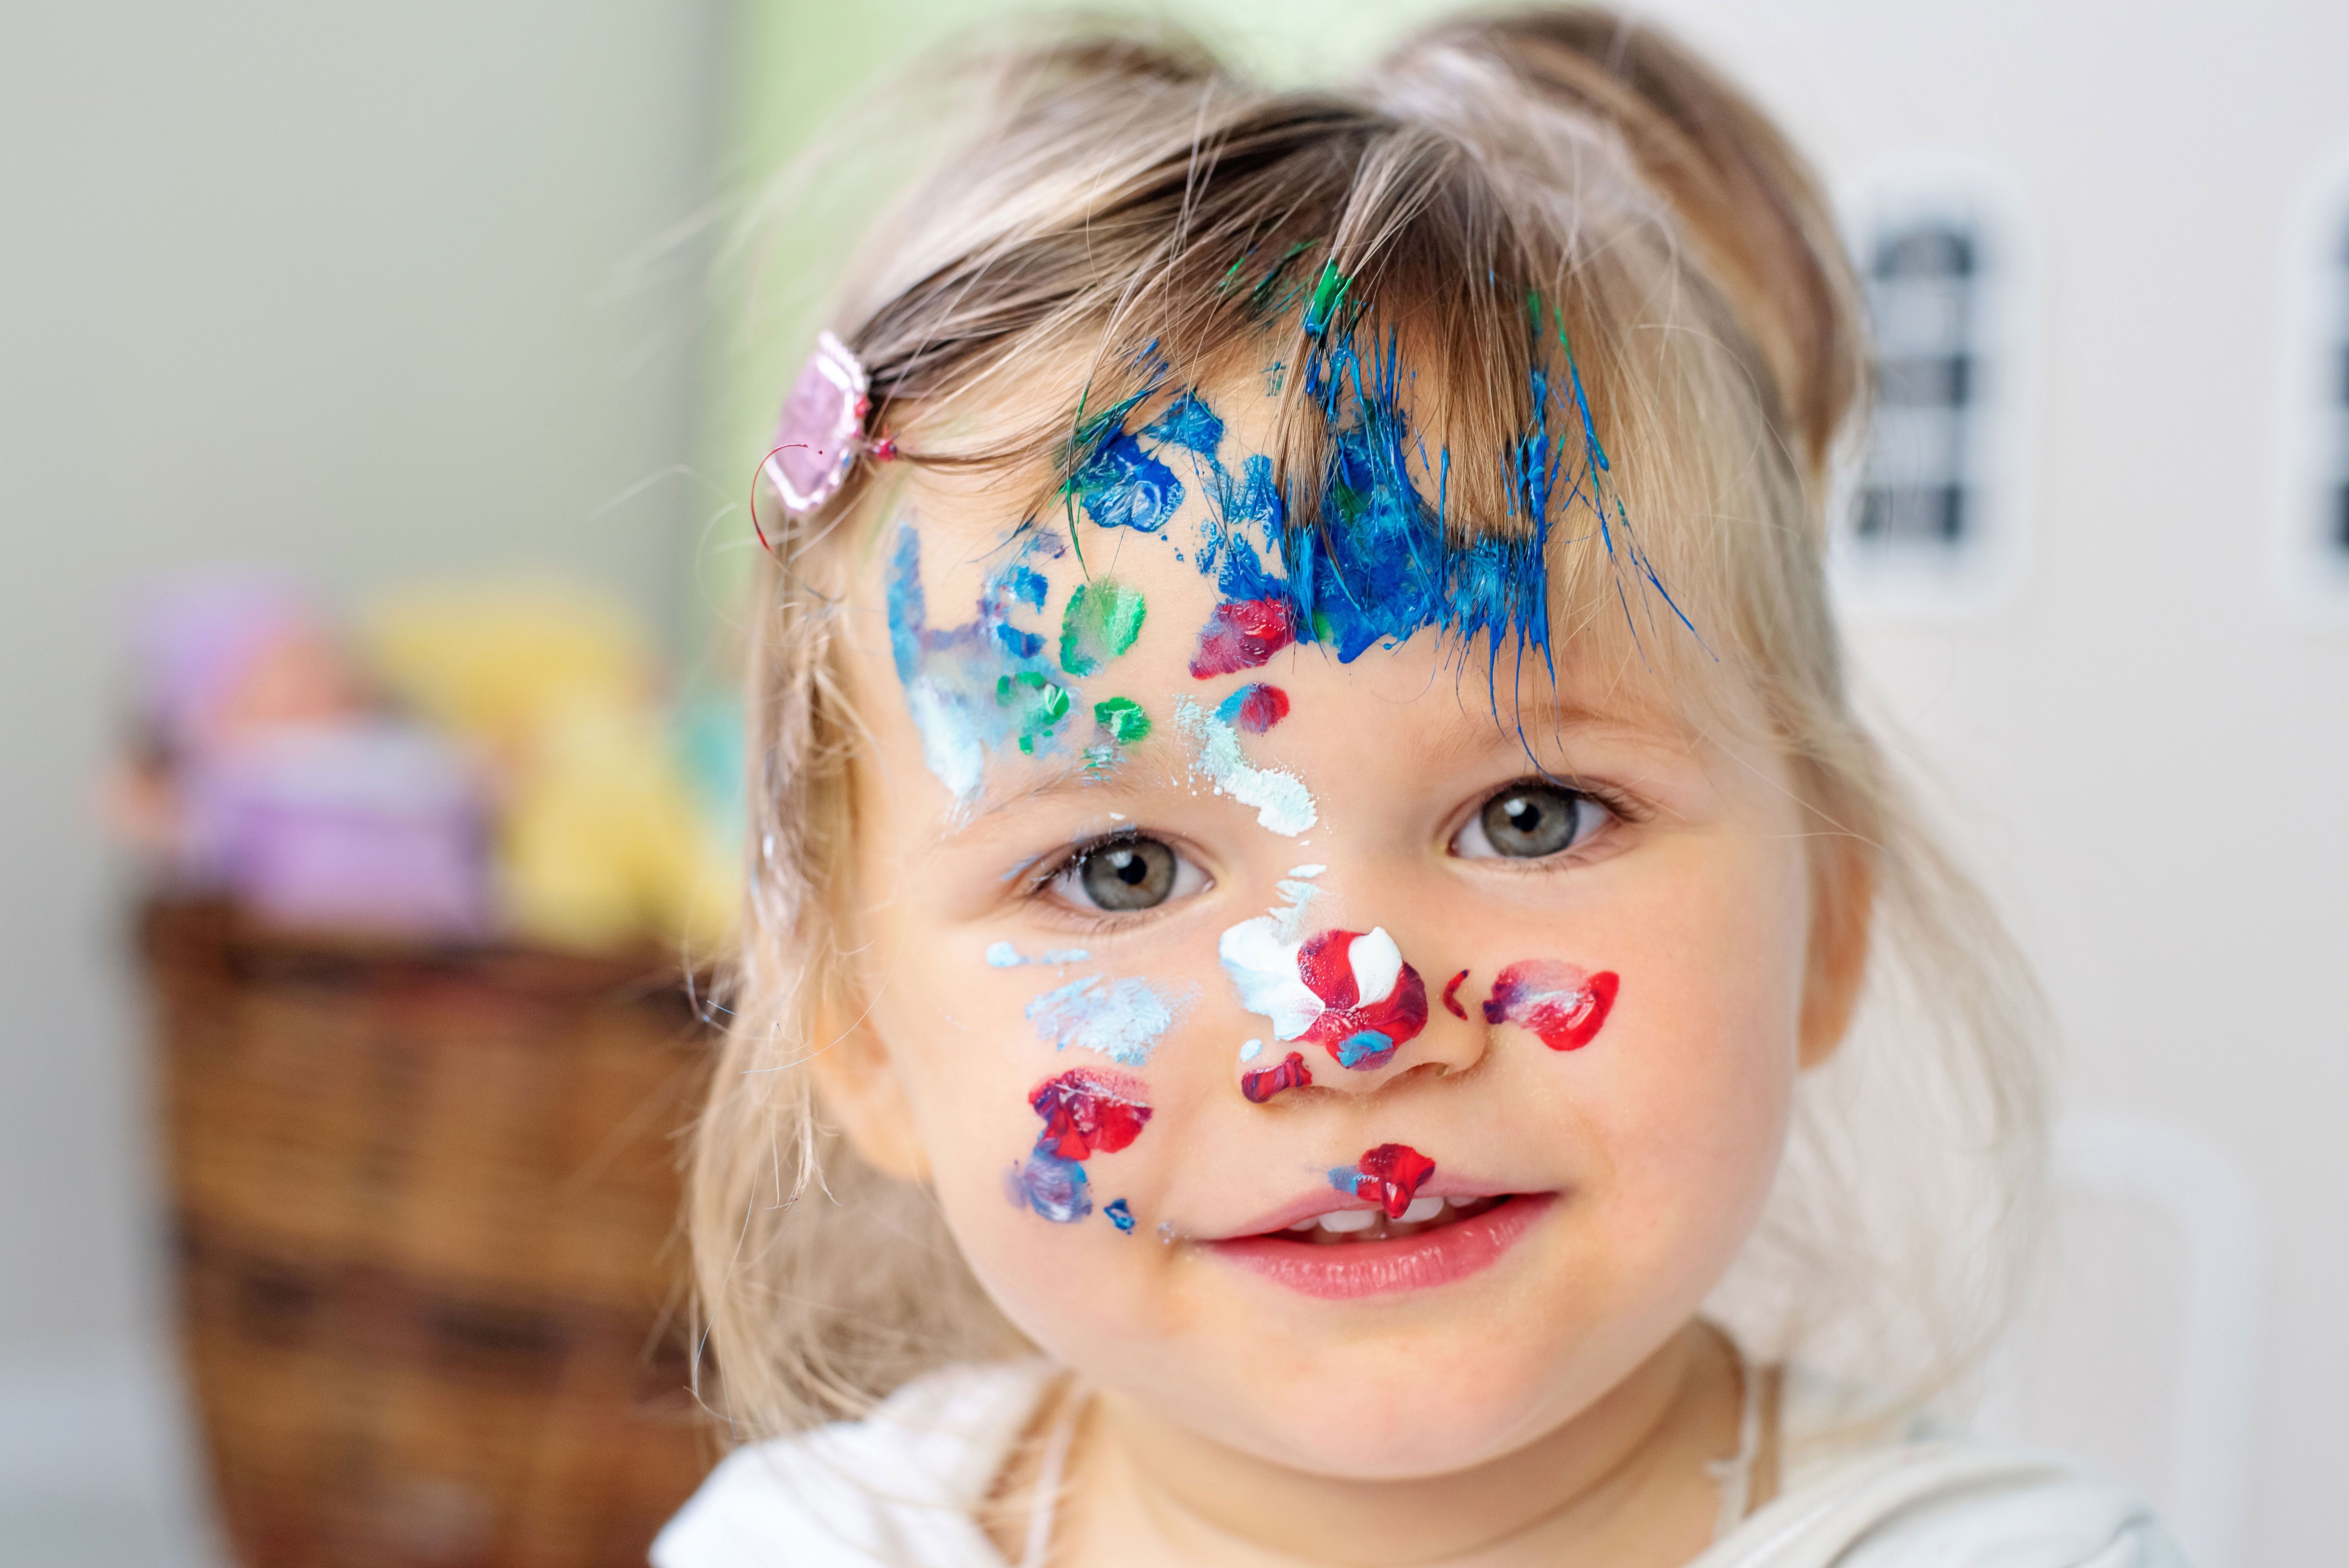 Child with paint on face